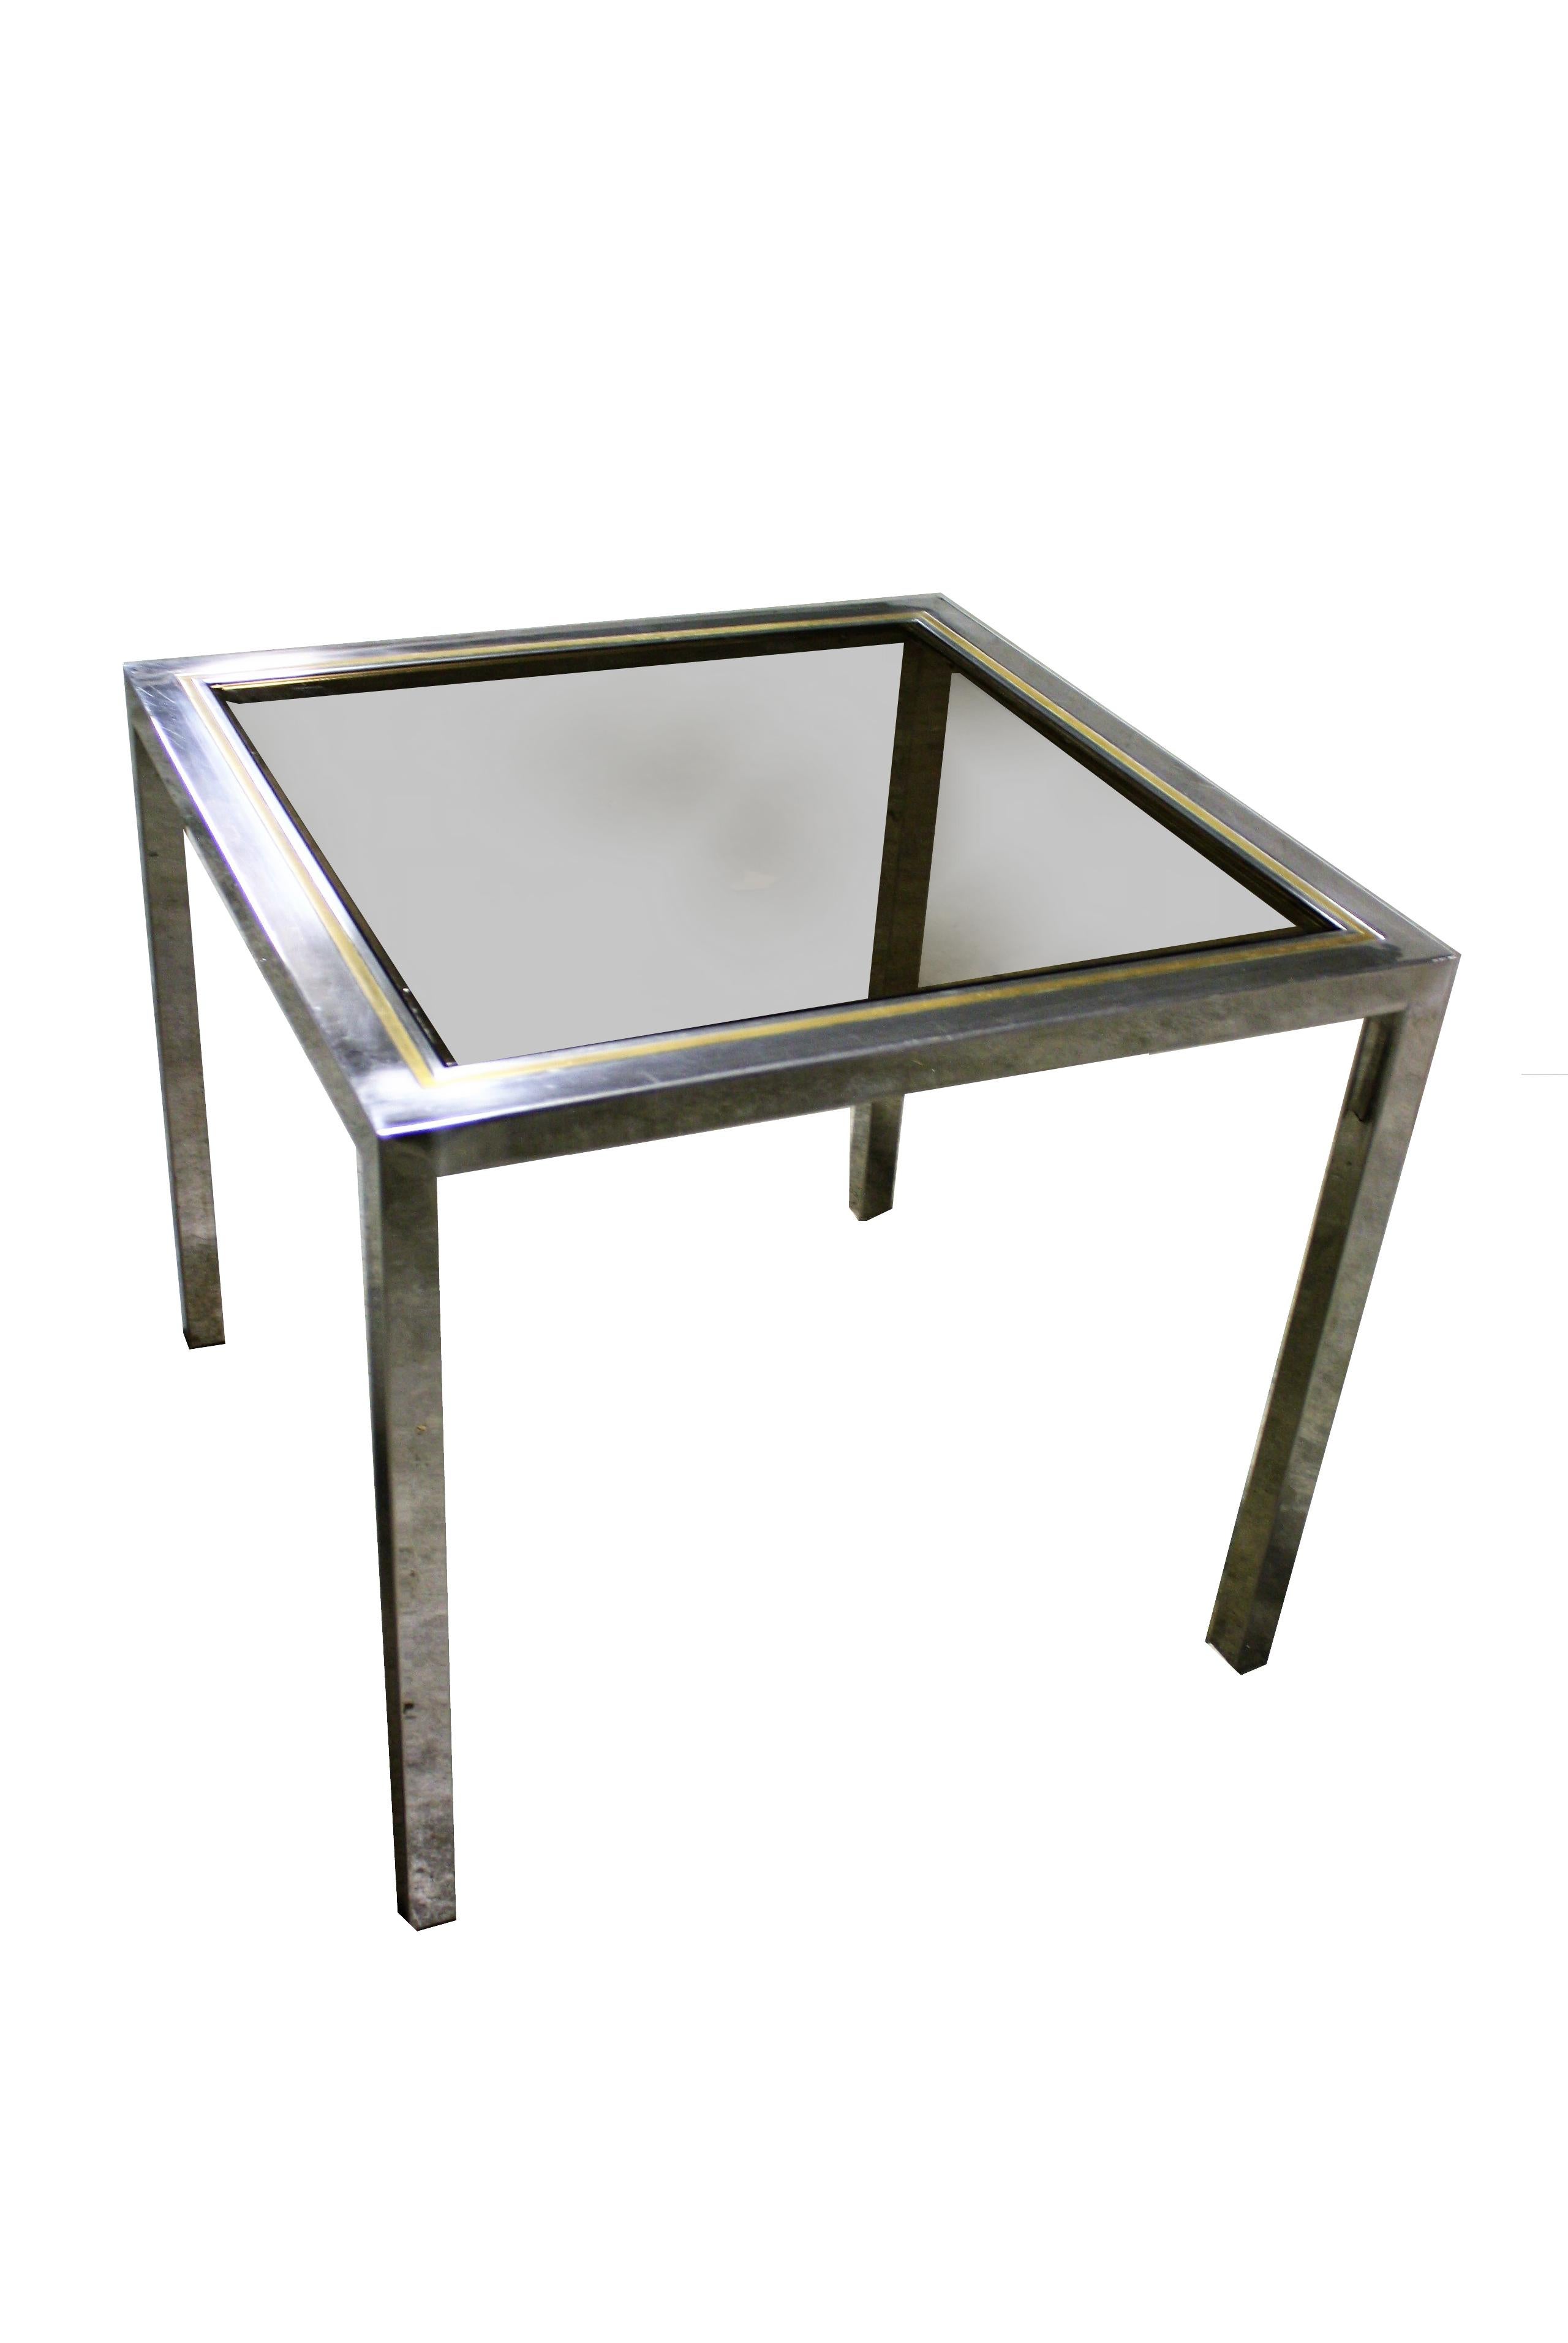 Vintage brass and chrome table in the style of Willy Rizzo.

The table can be used as a side table or as a small dining table (ideal for four persons).

It features a two-tone chrome and brass frame with smoked glass.

The table is in good